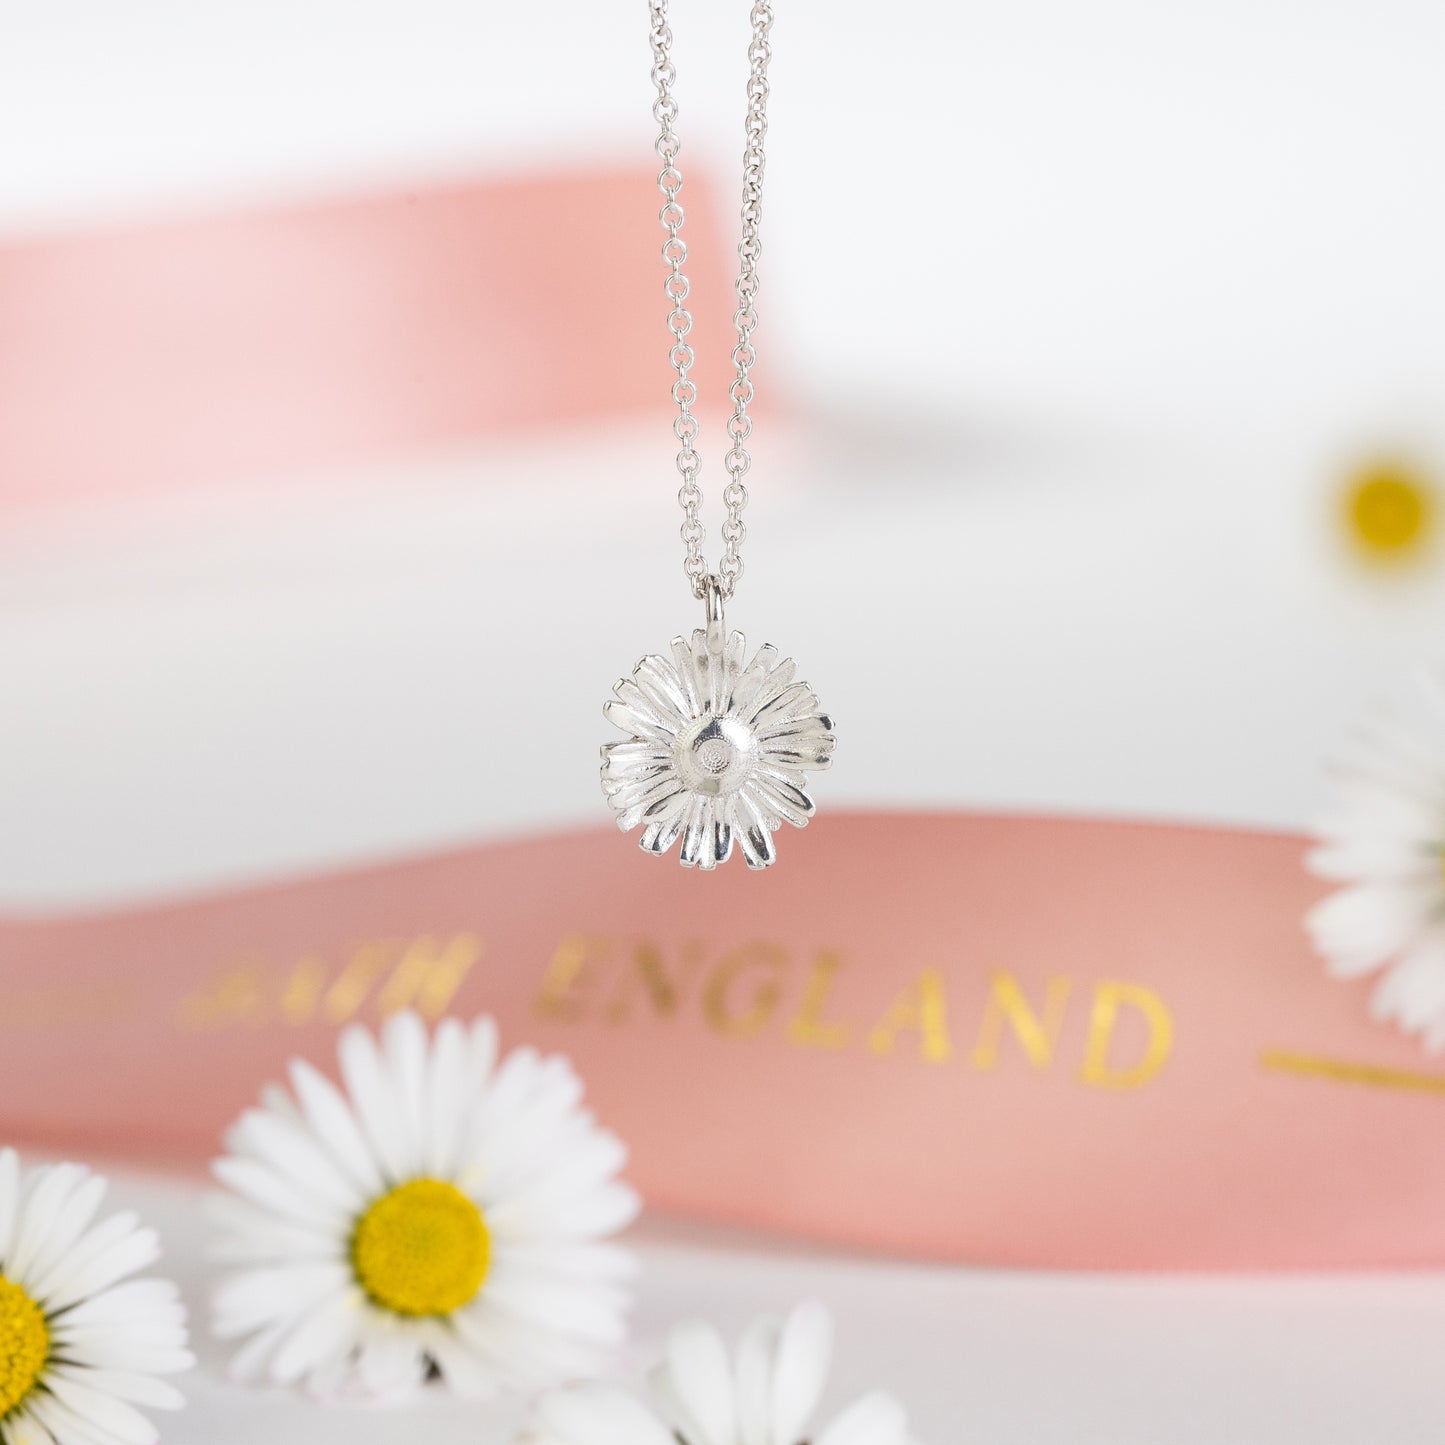 5th Anniversary Gift - Daisy Flower Necklace - Silver